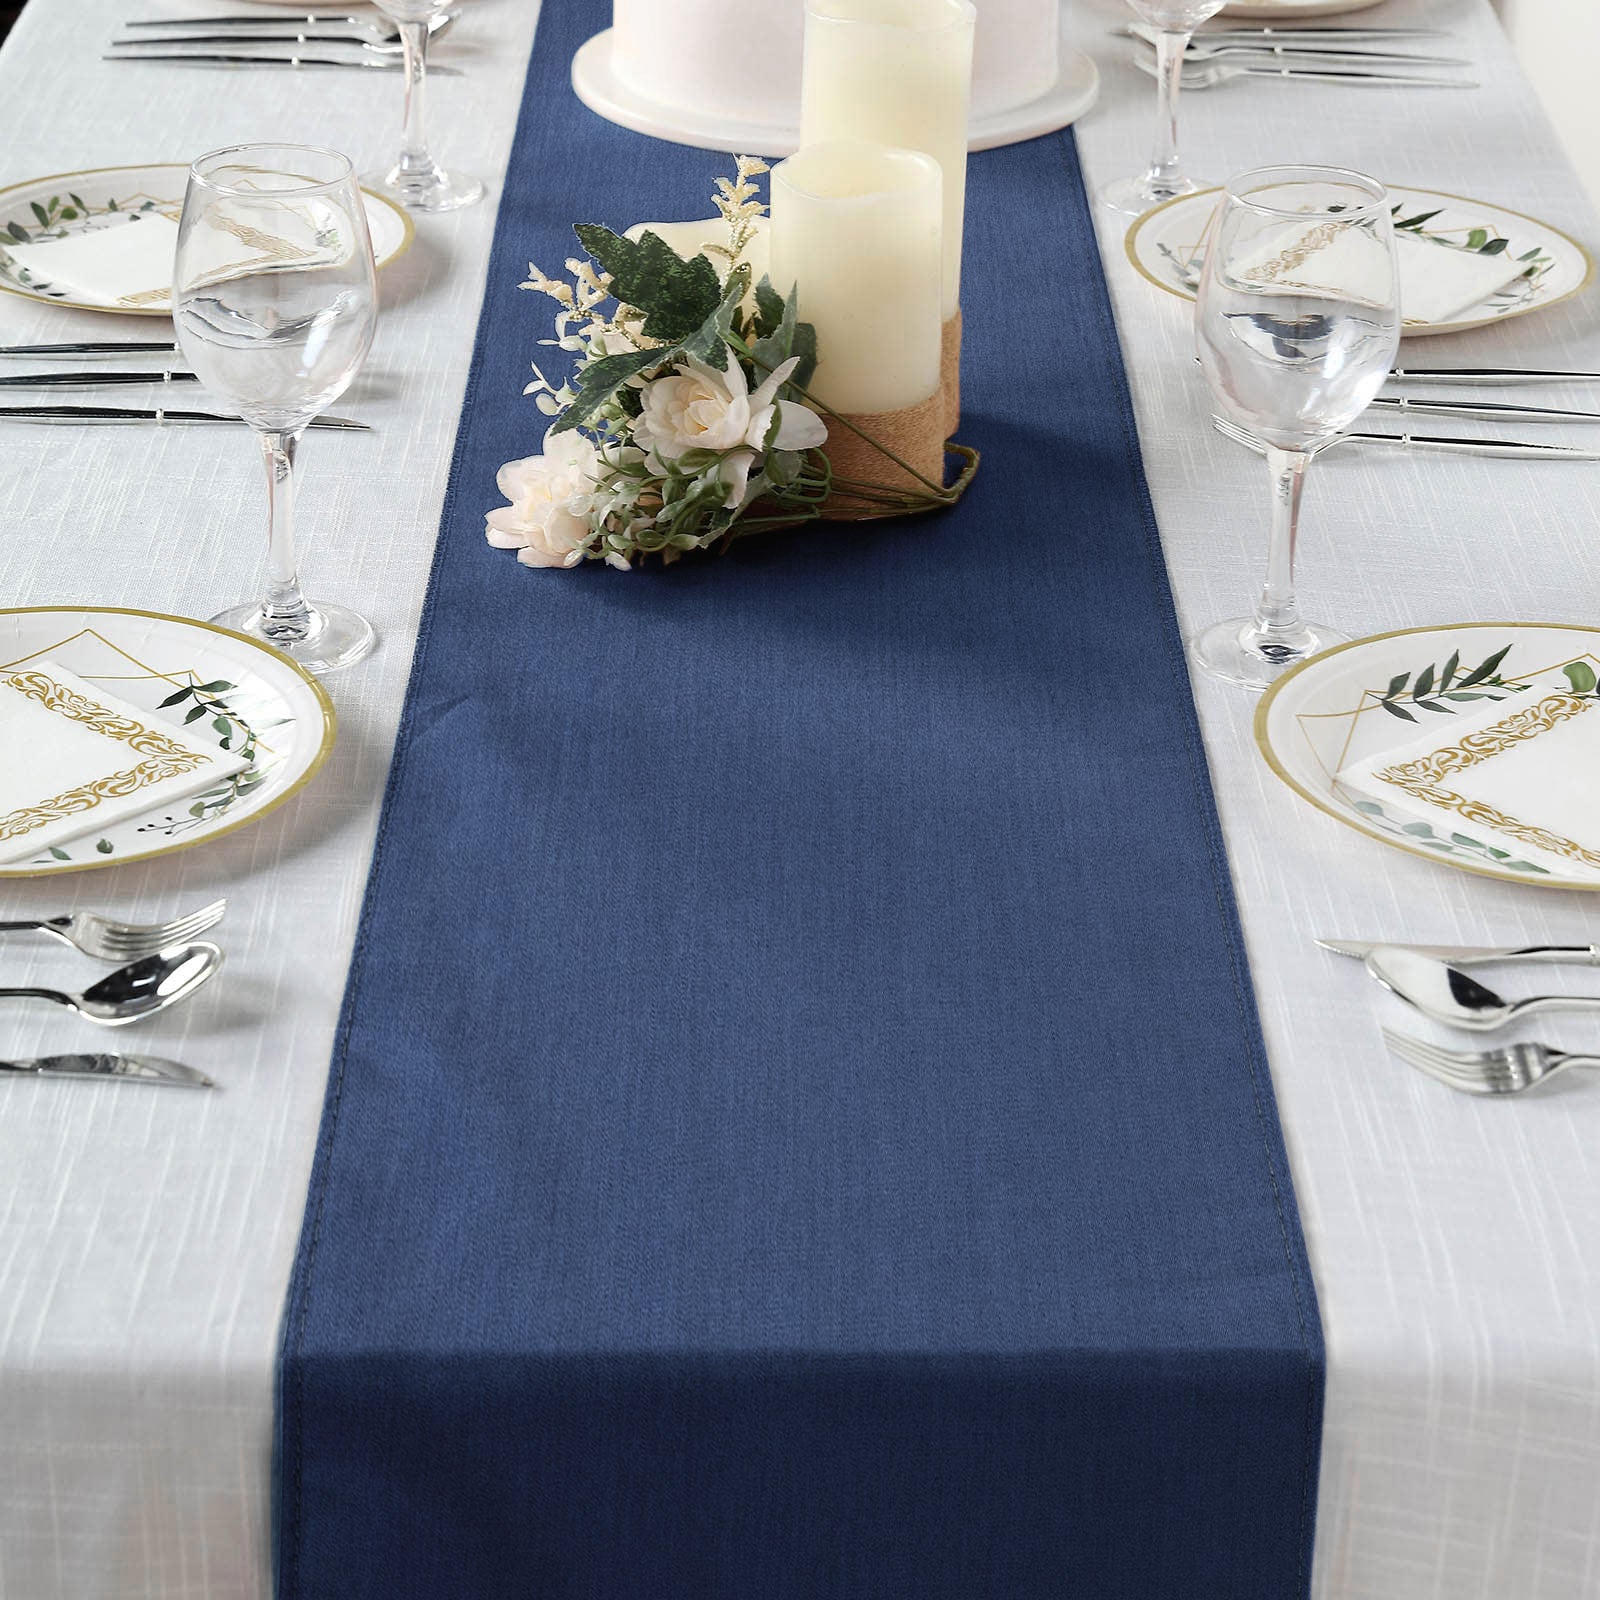 Disposable Plastic Tablecloths & Table Covers | Smarty Had a Party